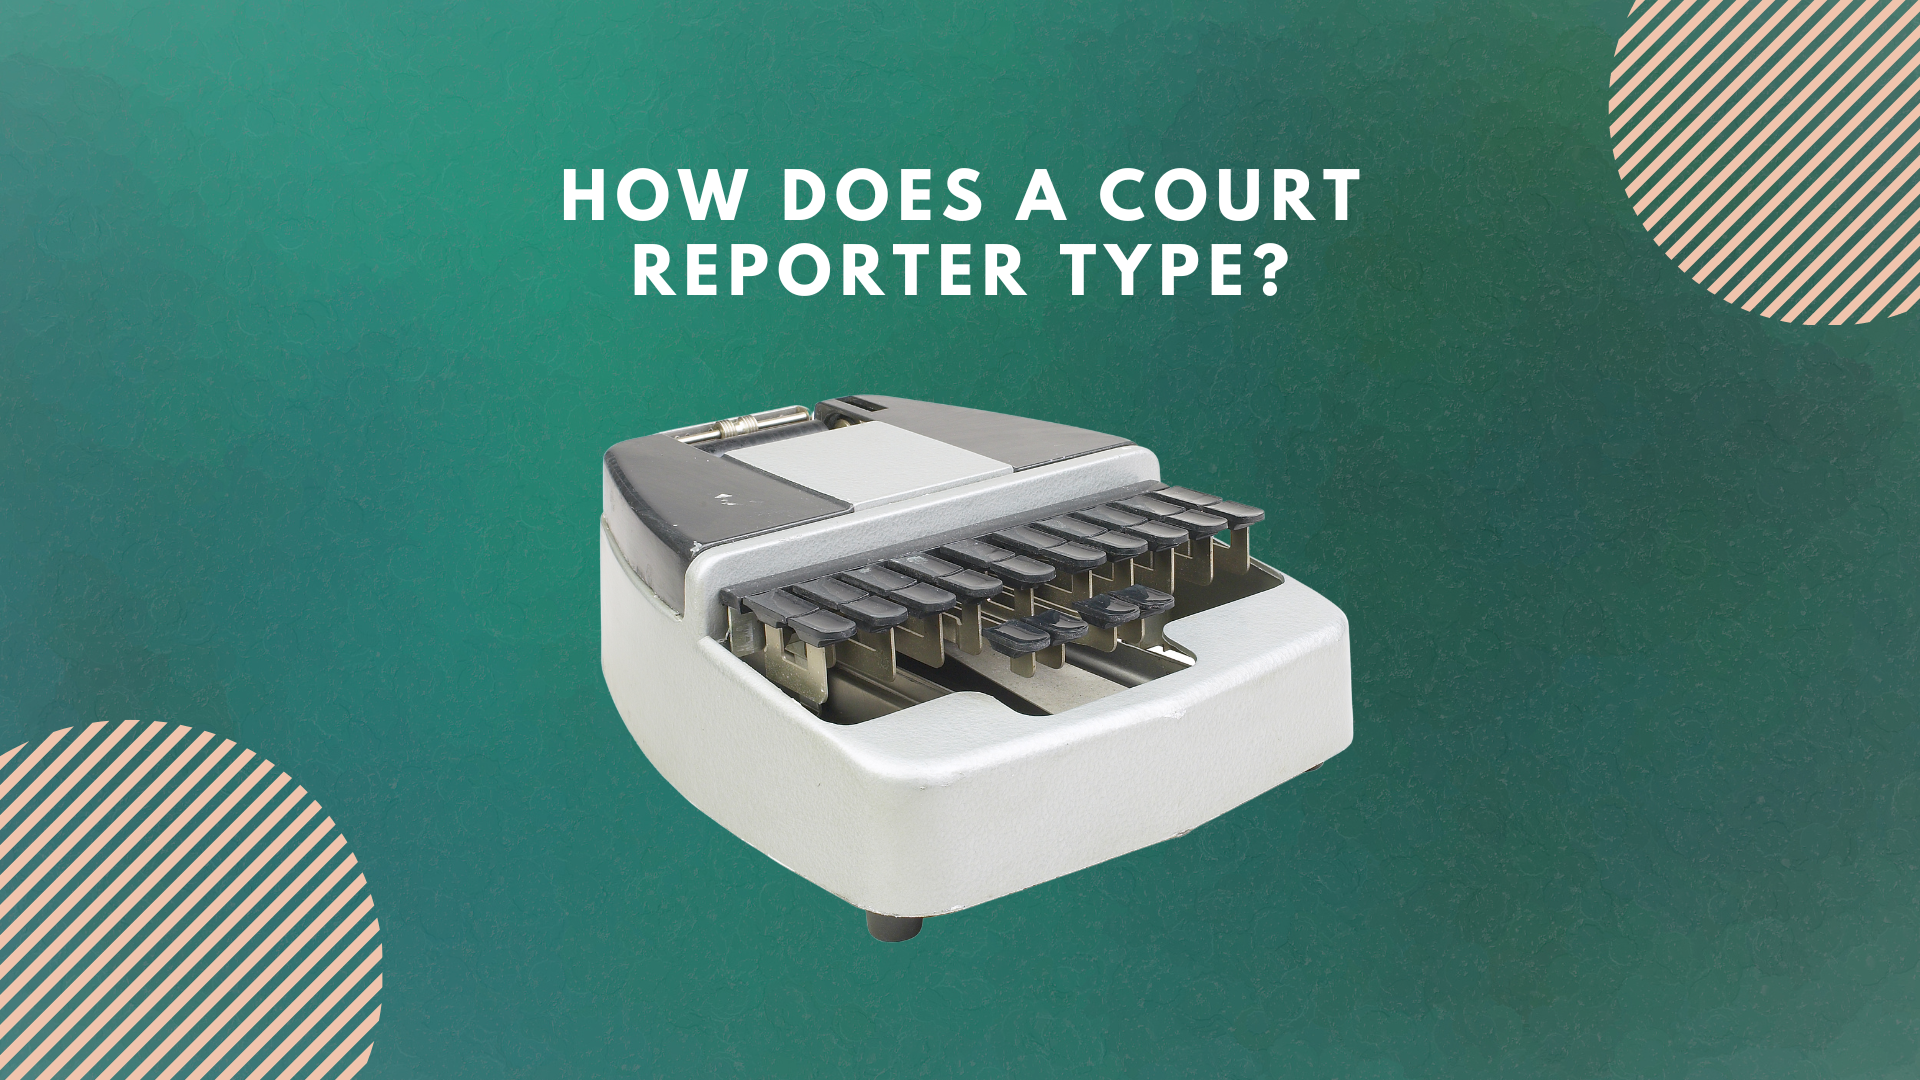 How does a court reporter type